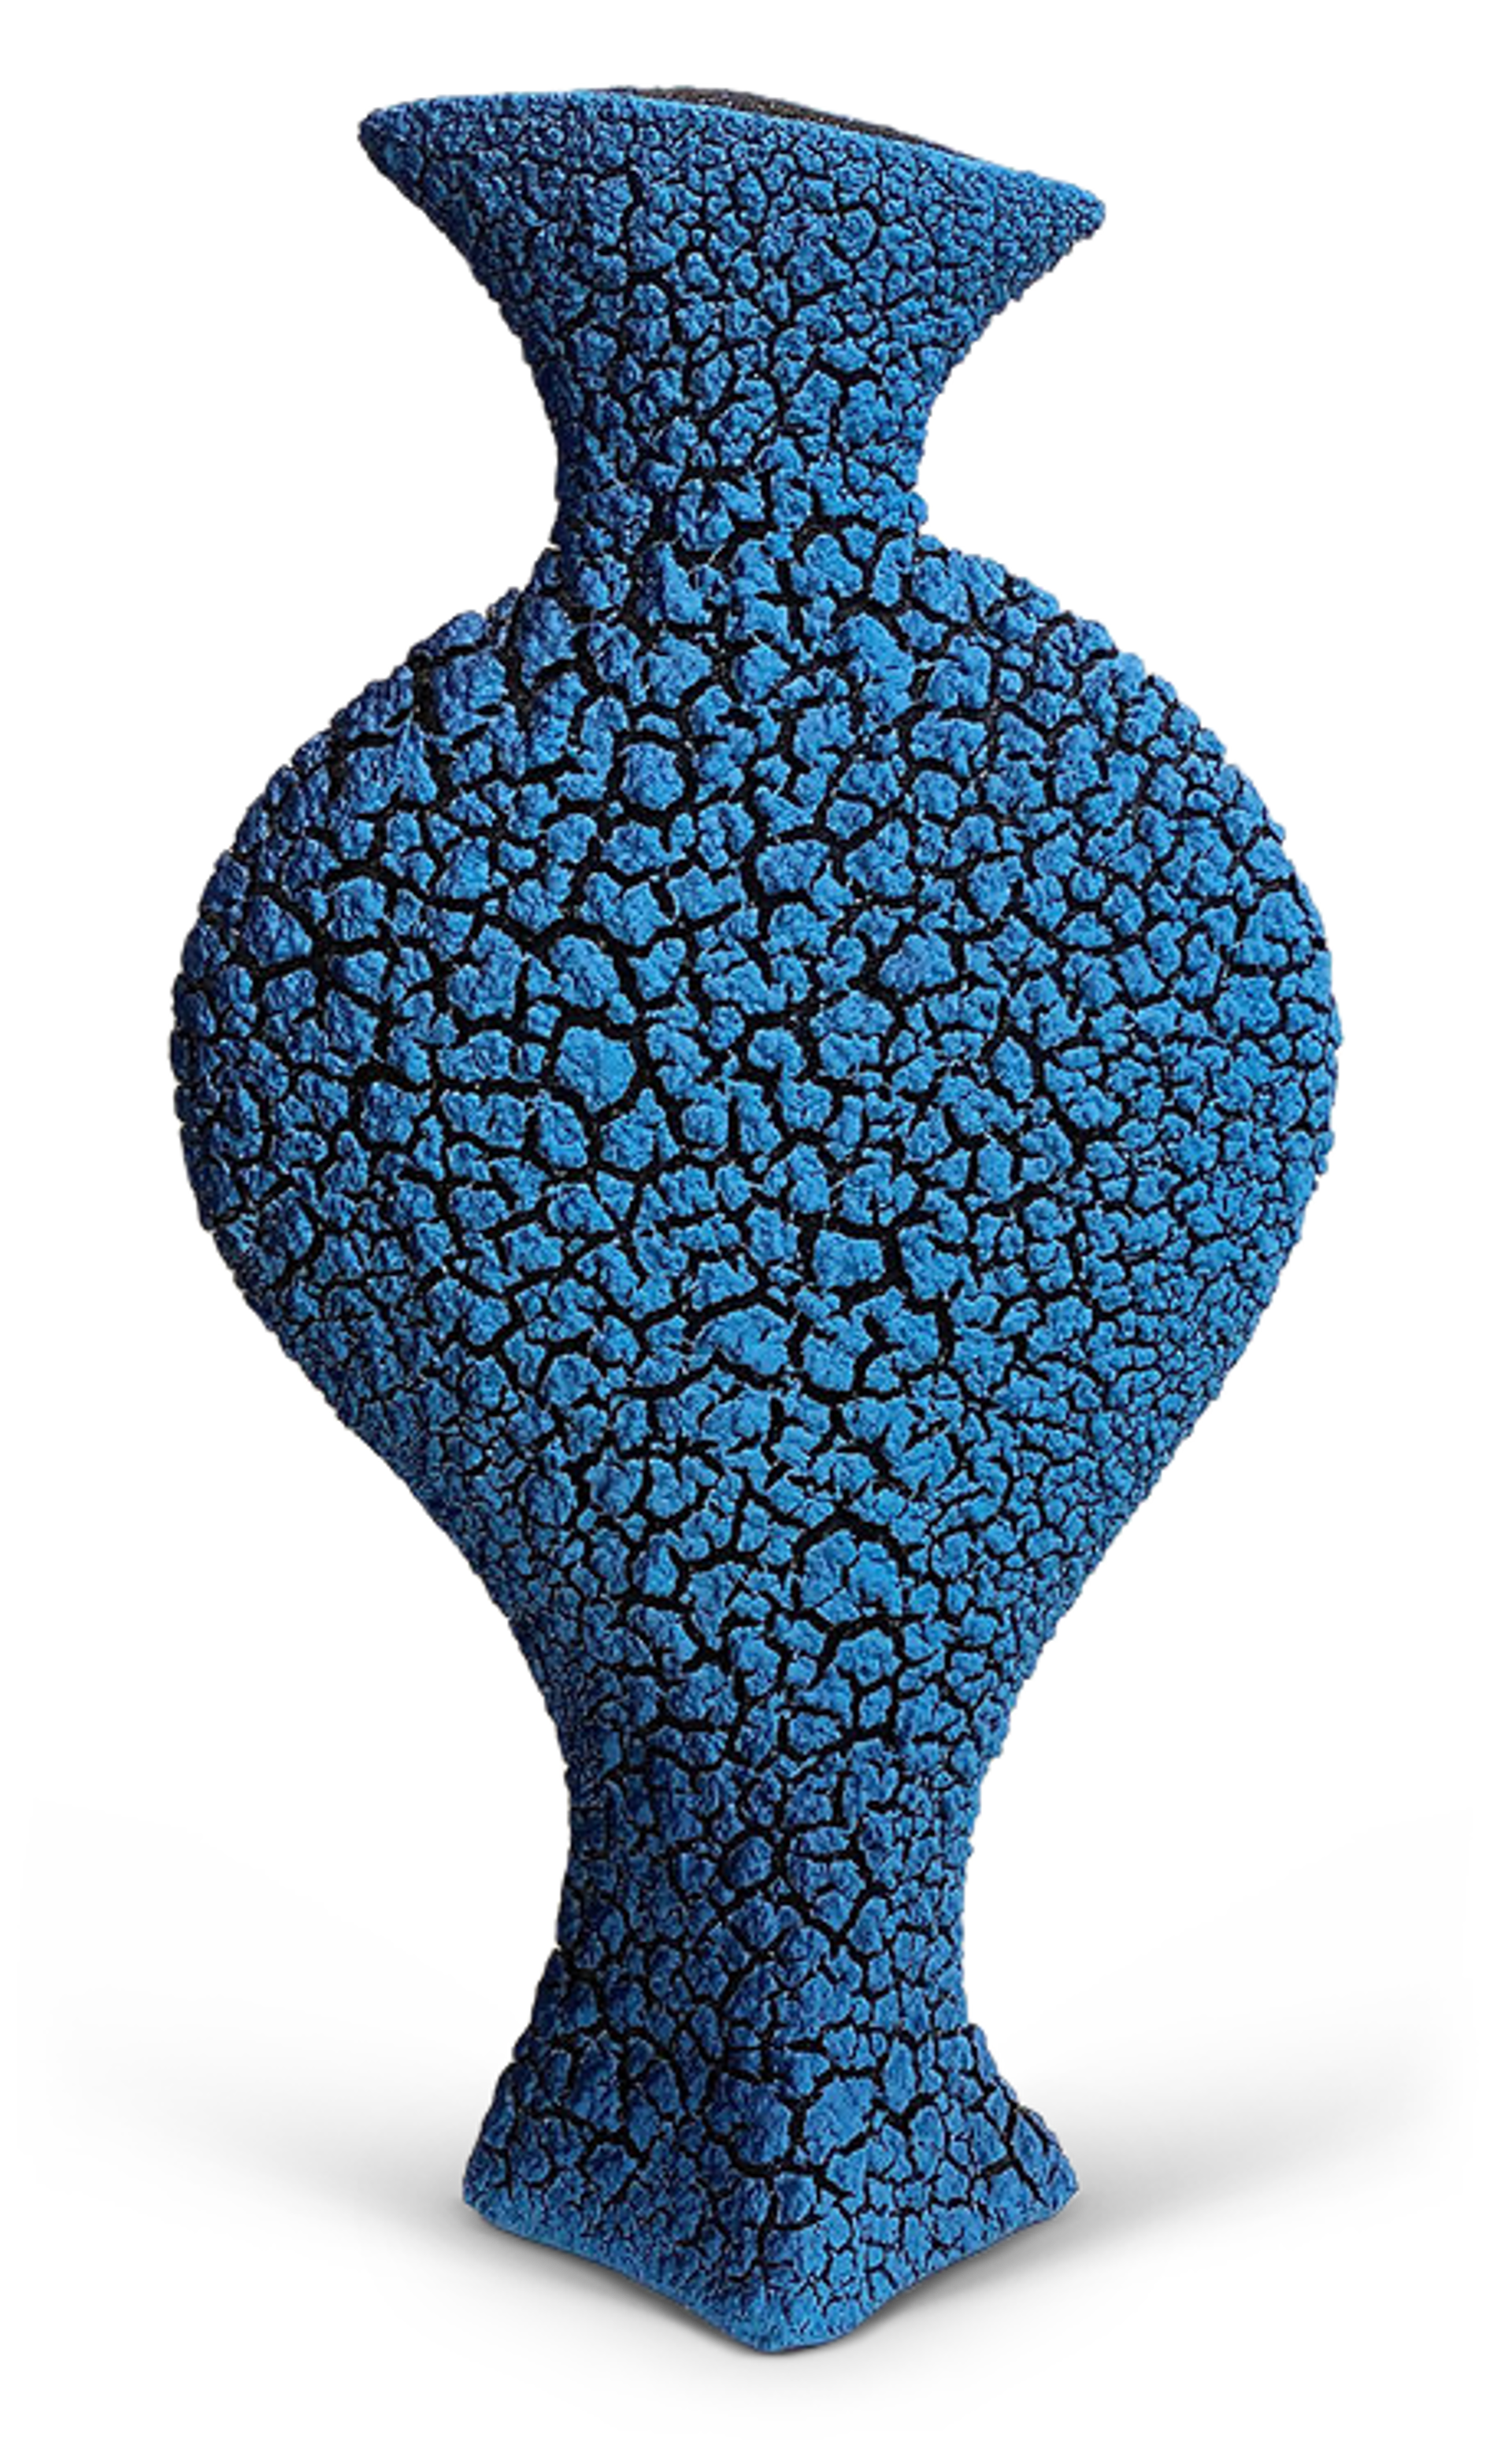 Sedona Envelope Vase ~ Turquoise Blue/Sapphire Blue (Other colors can be ordered) by Randy O'Brien